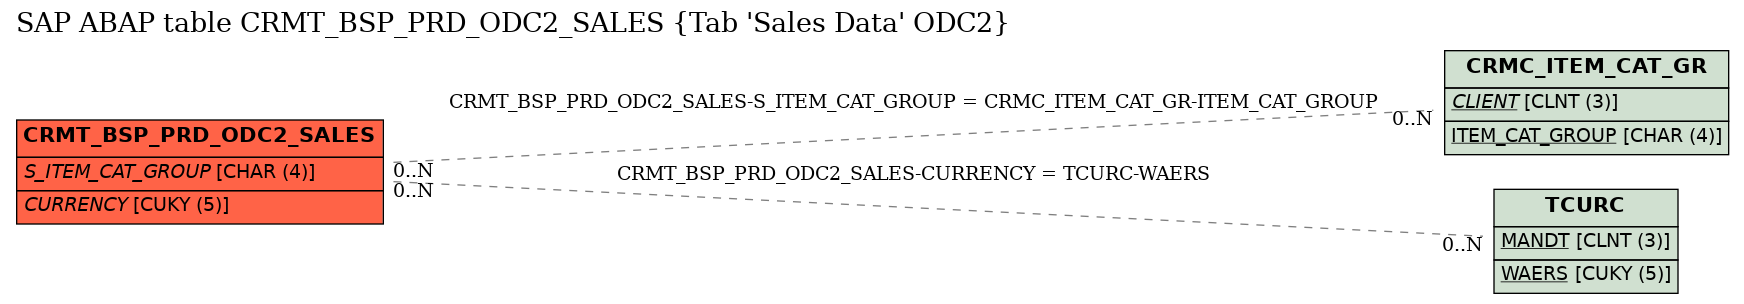 E-R Diagram for table CRMT_BSP_PRD_ODC2_SALES (Tab 